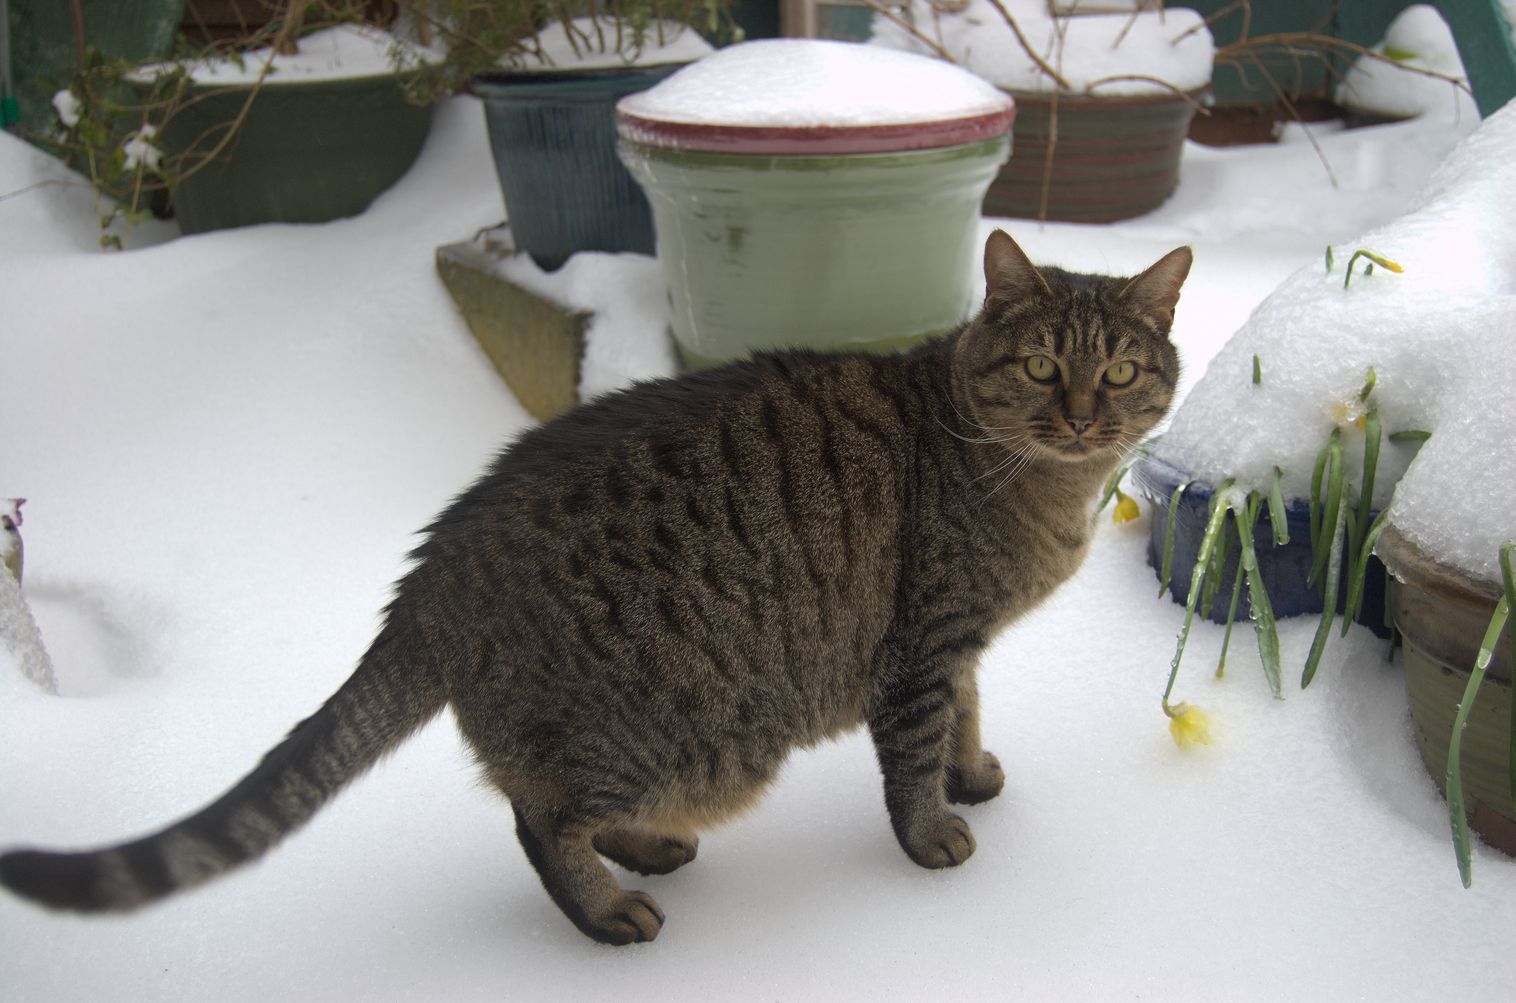 Zaphod the cat standing on the ice-encrusted snow, staring at the camera